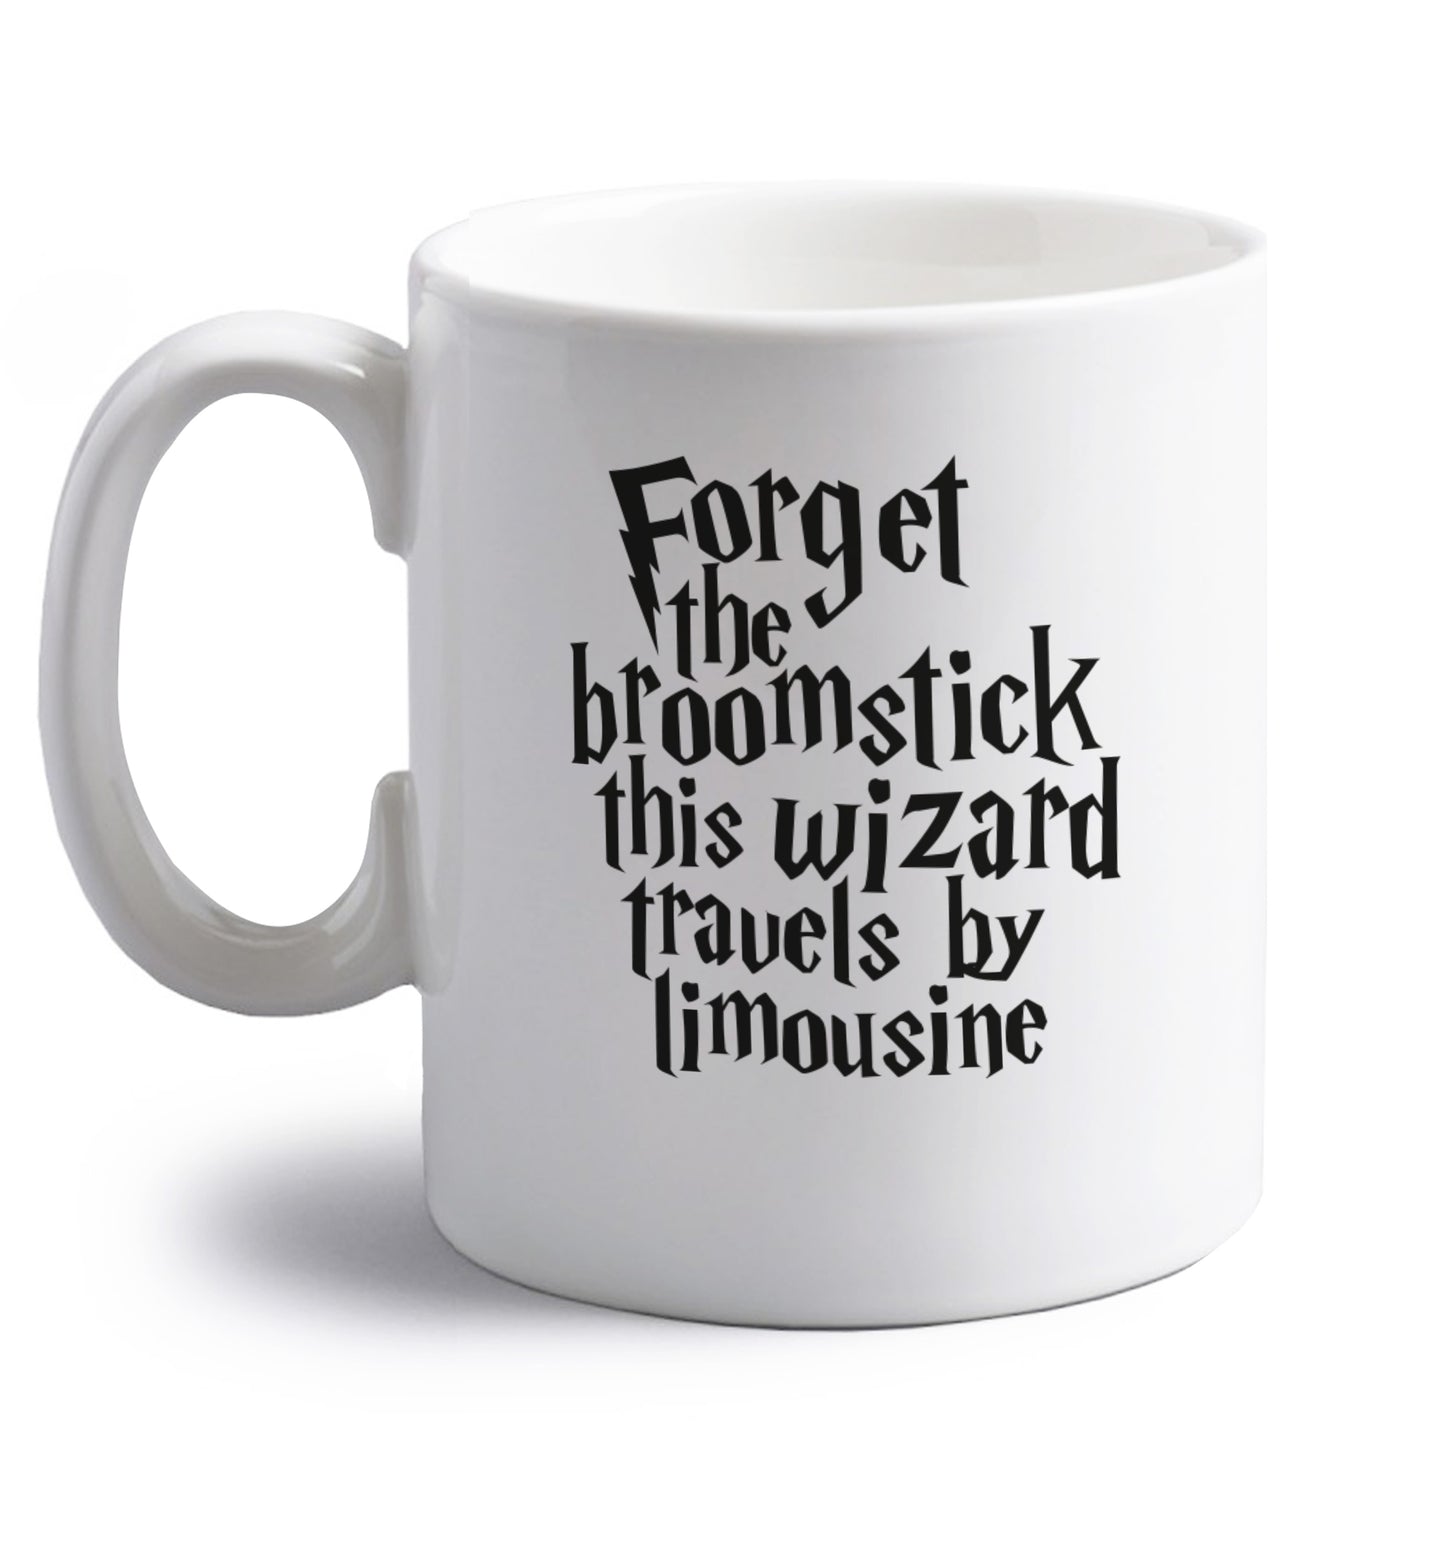 Forget the broomstick this wizard travels by limousine right handed white ceramic mug 